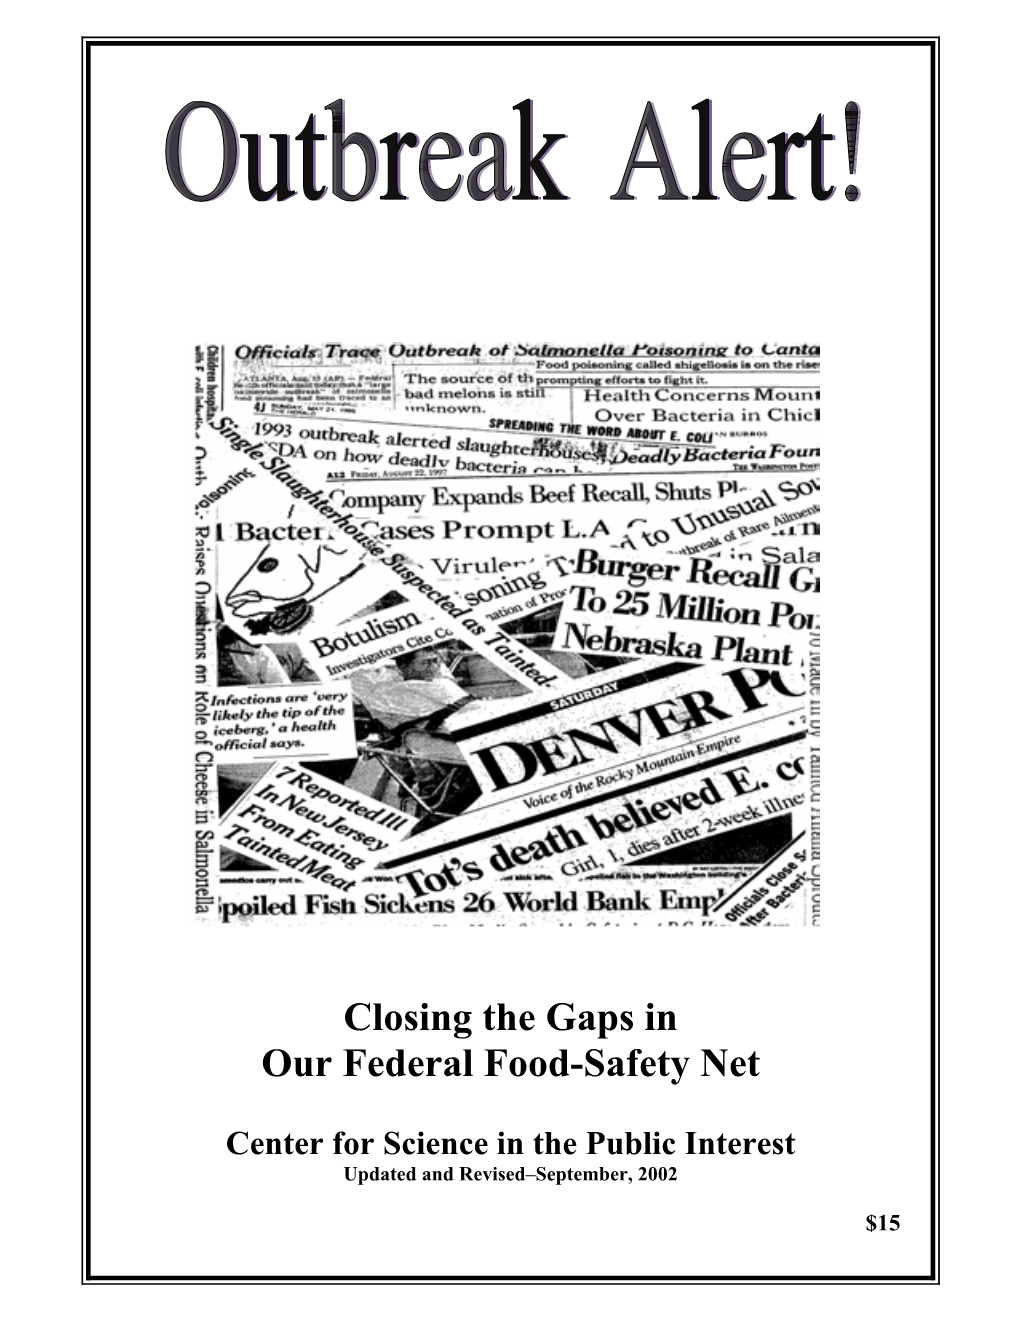 Closing the Gaps in Our Federal Food-Safety Net